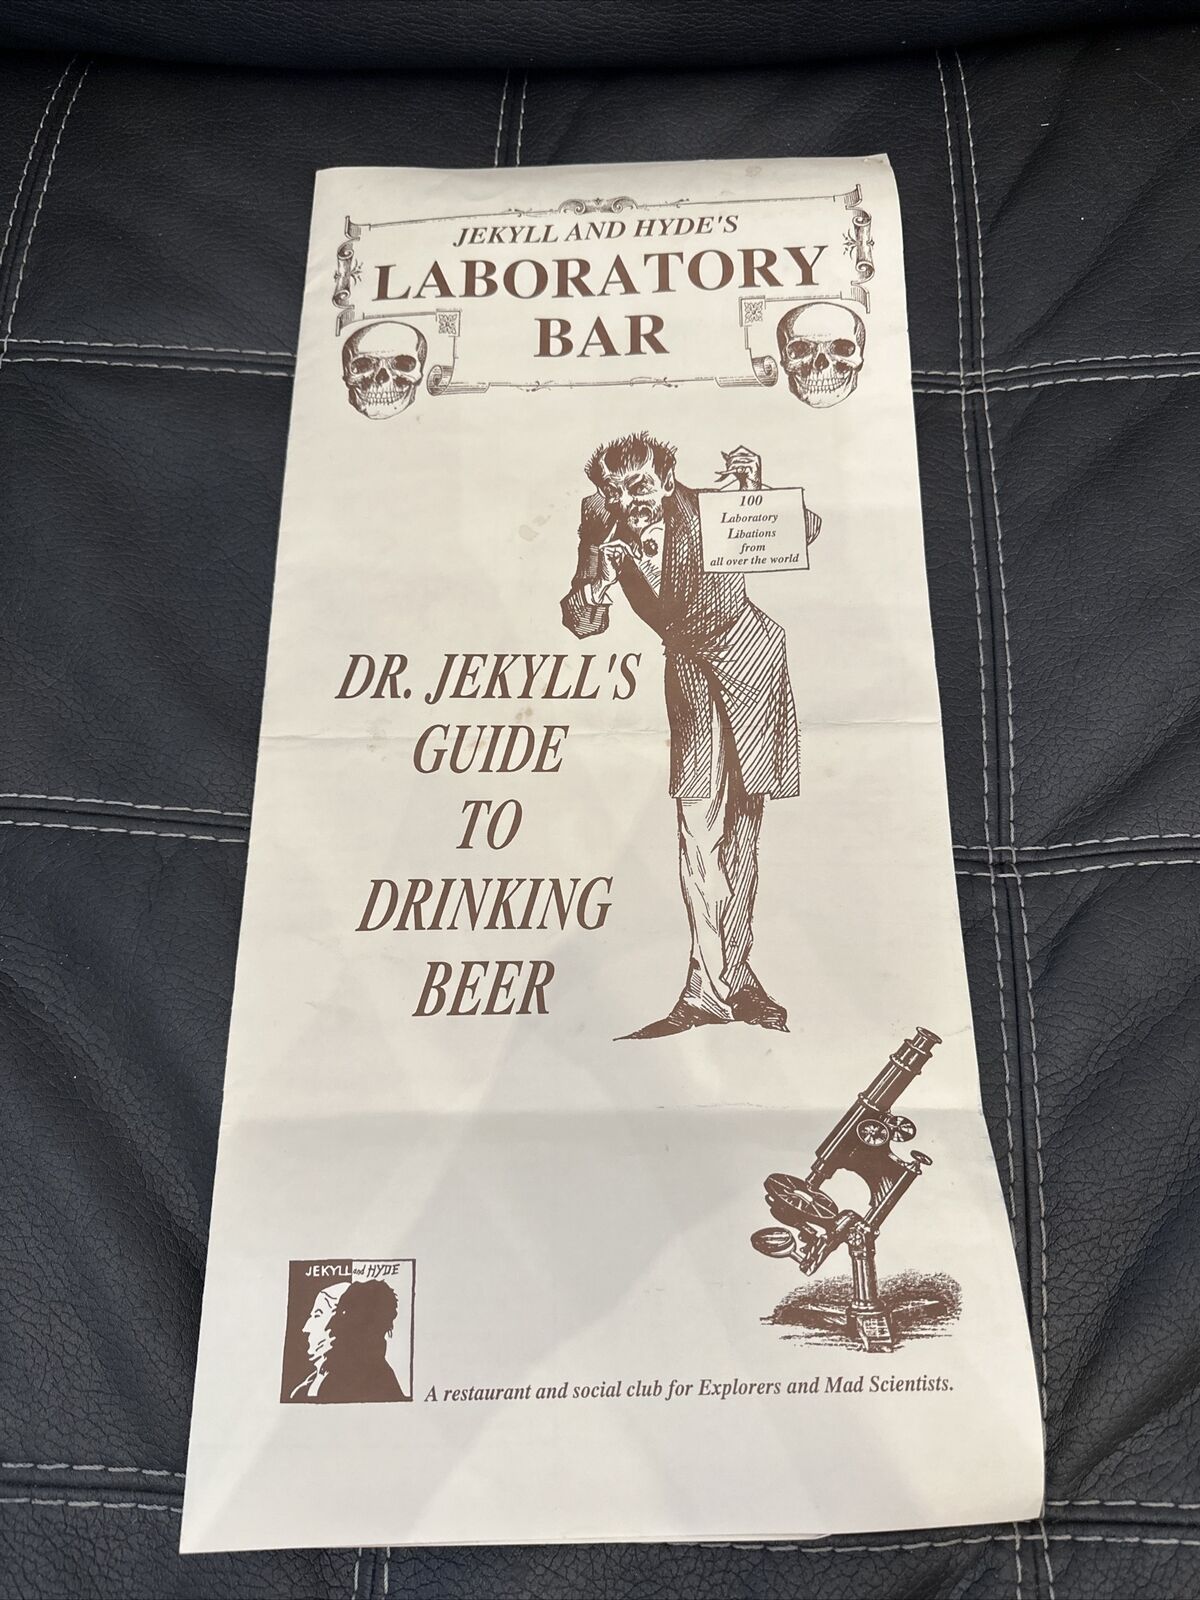 Jekyll and Hyde Laboratory Bar Dr Jekyll’s Guide To Drinking Beer